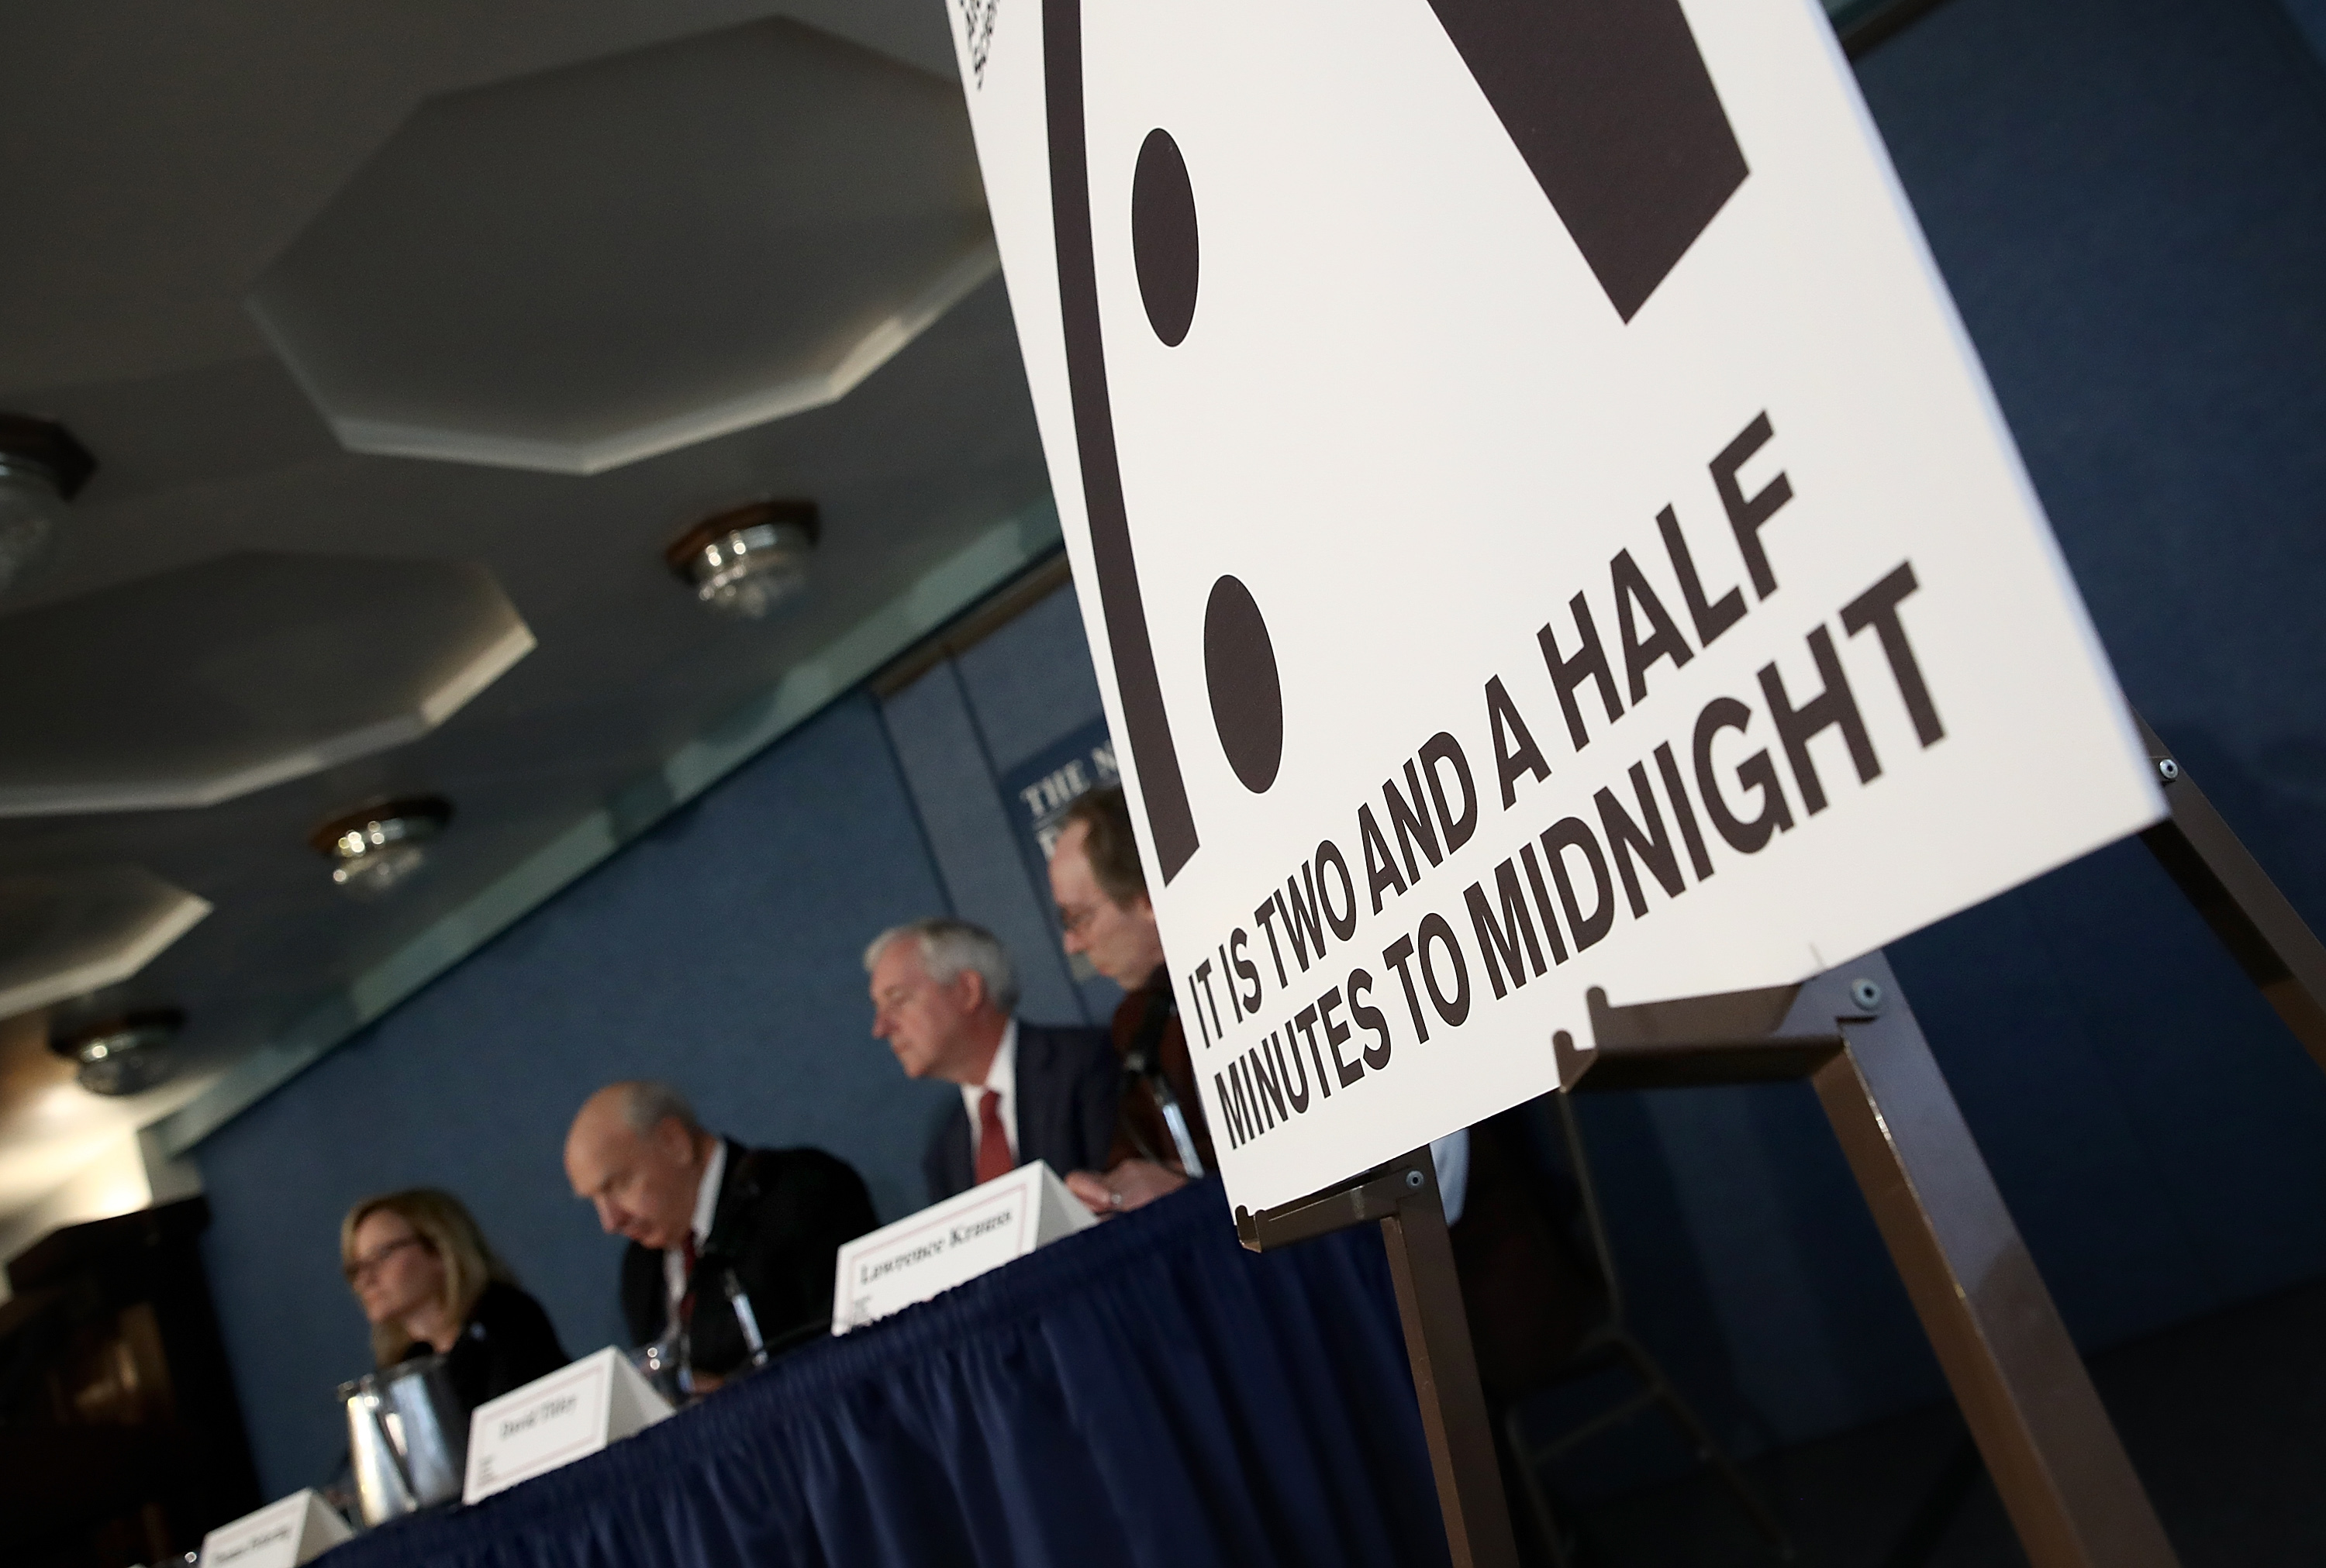 Members of the Bulletin of Atomic Scientists deliver remarks on the 2017 time for the "Doomsday Clock" on Jan. 26, 2017 in Washington, DC. (Win McNamee/Getty Images)